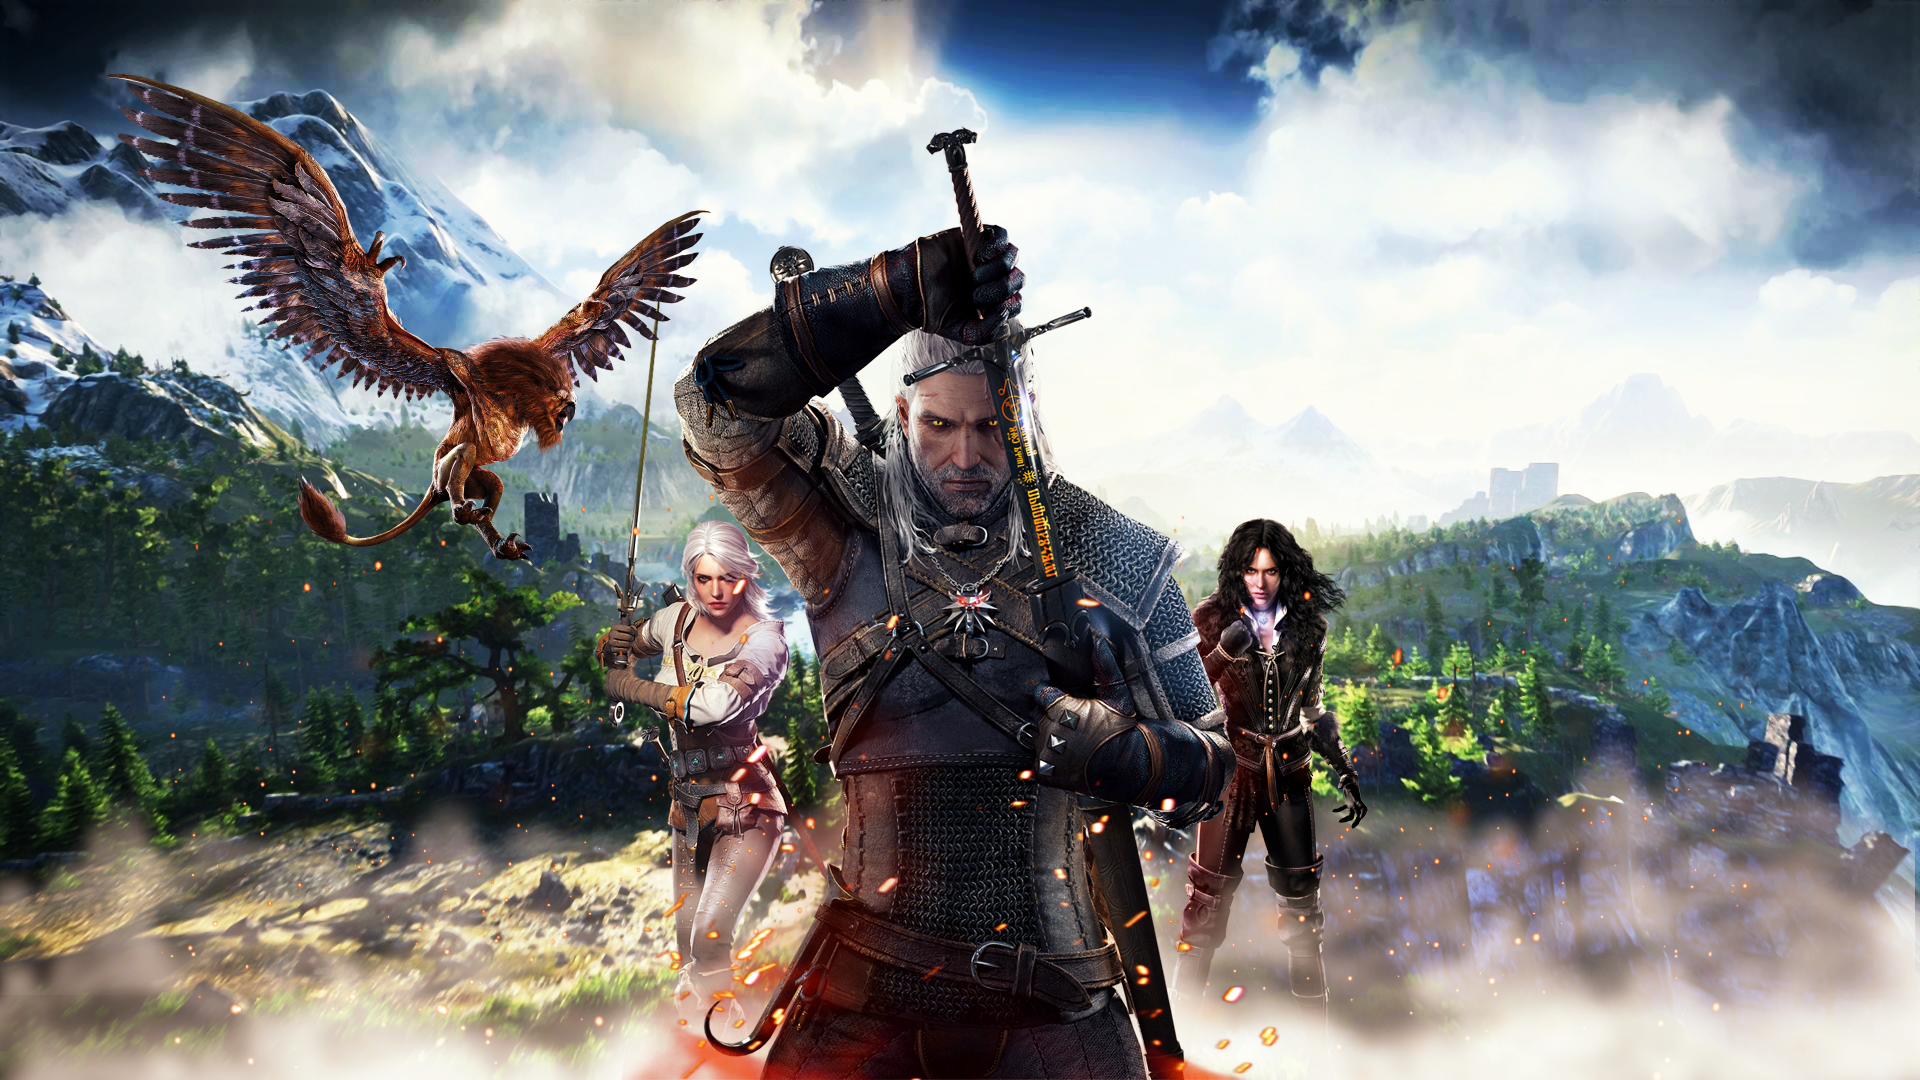 810+ The Witcher 3: Wild Hunt HD Wallpapers and Backgrounds